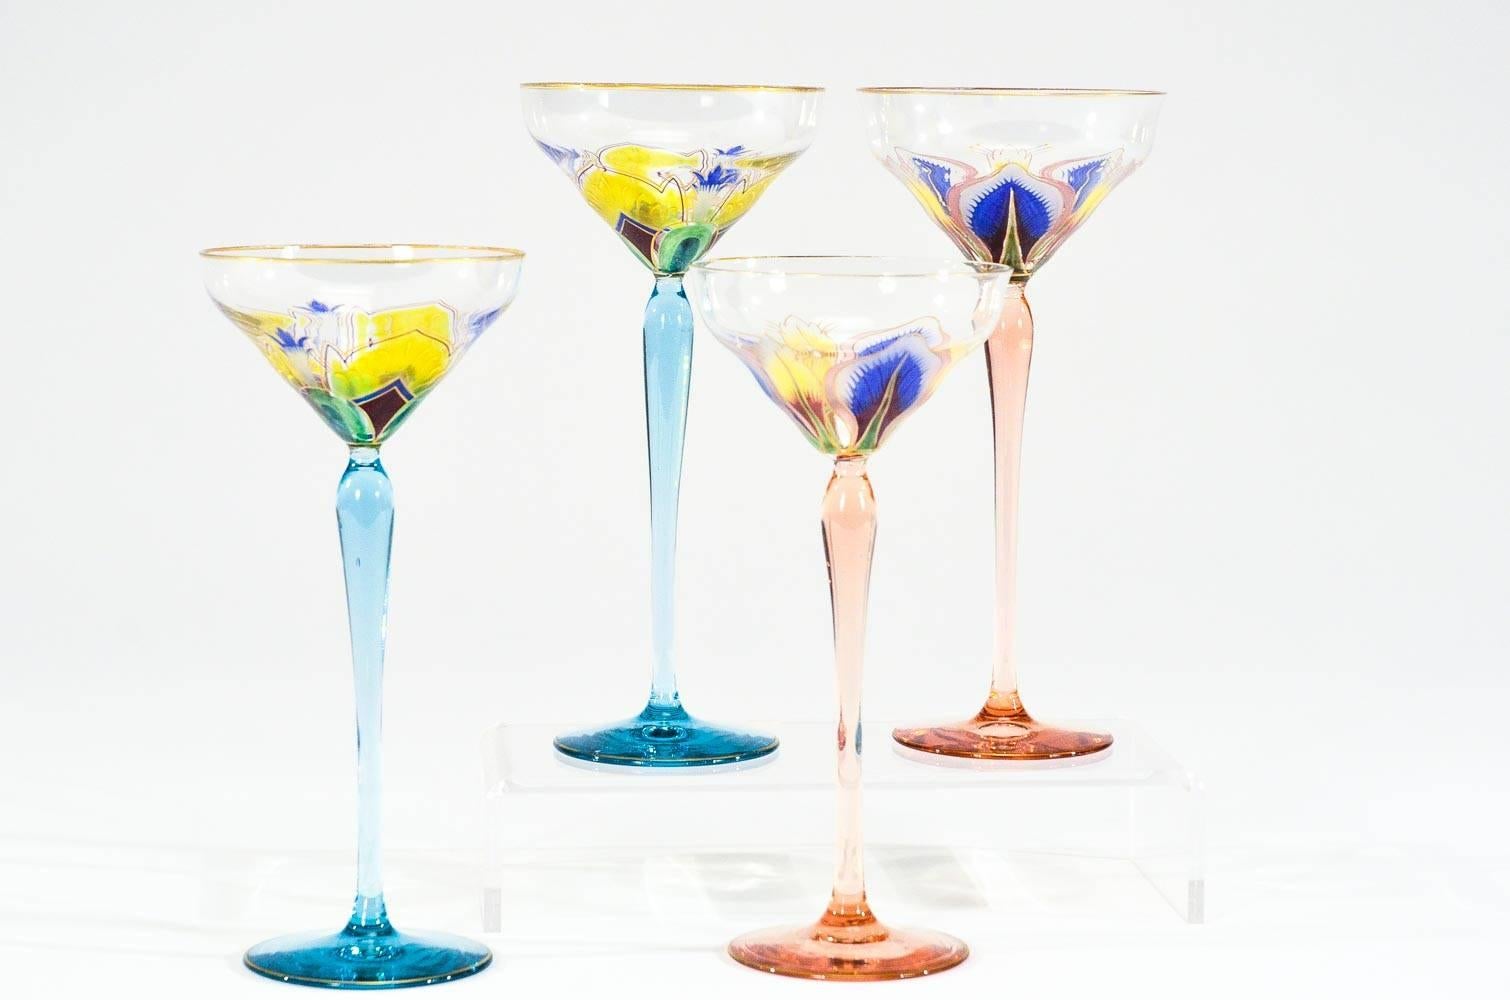 For the collector, this is a set 4 tall hand blown crystal goblets with hand painted transparent enamel floral decoration in the Art Nouveau style. Each is uniquely decorated with flowers with a beautiful gold trim. Made by one of the great Bohemian